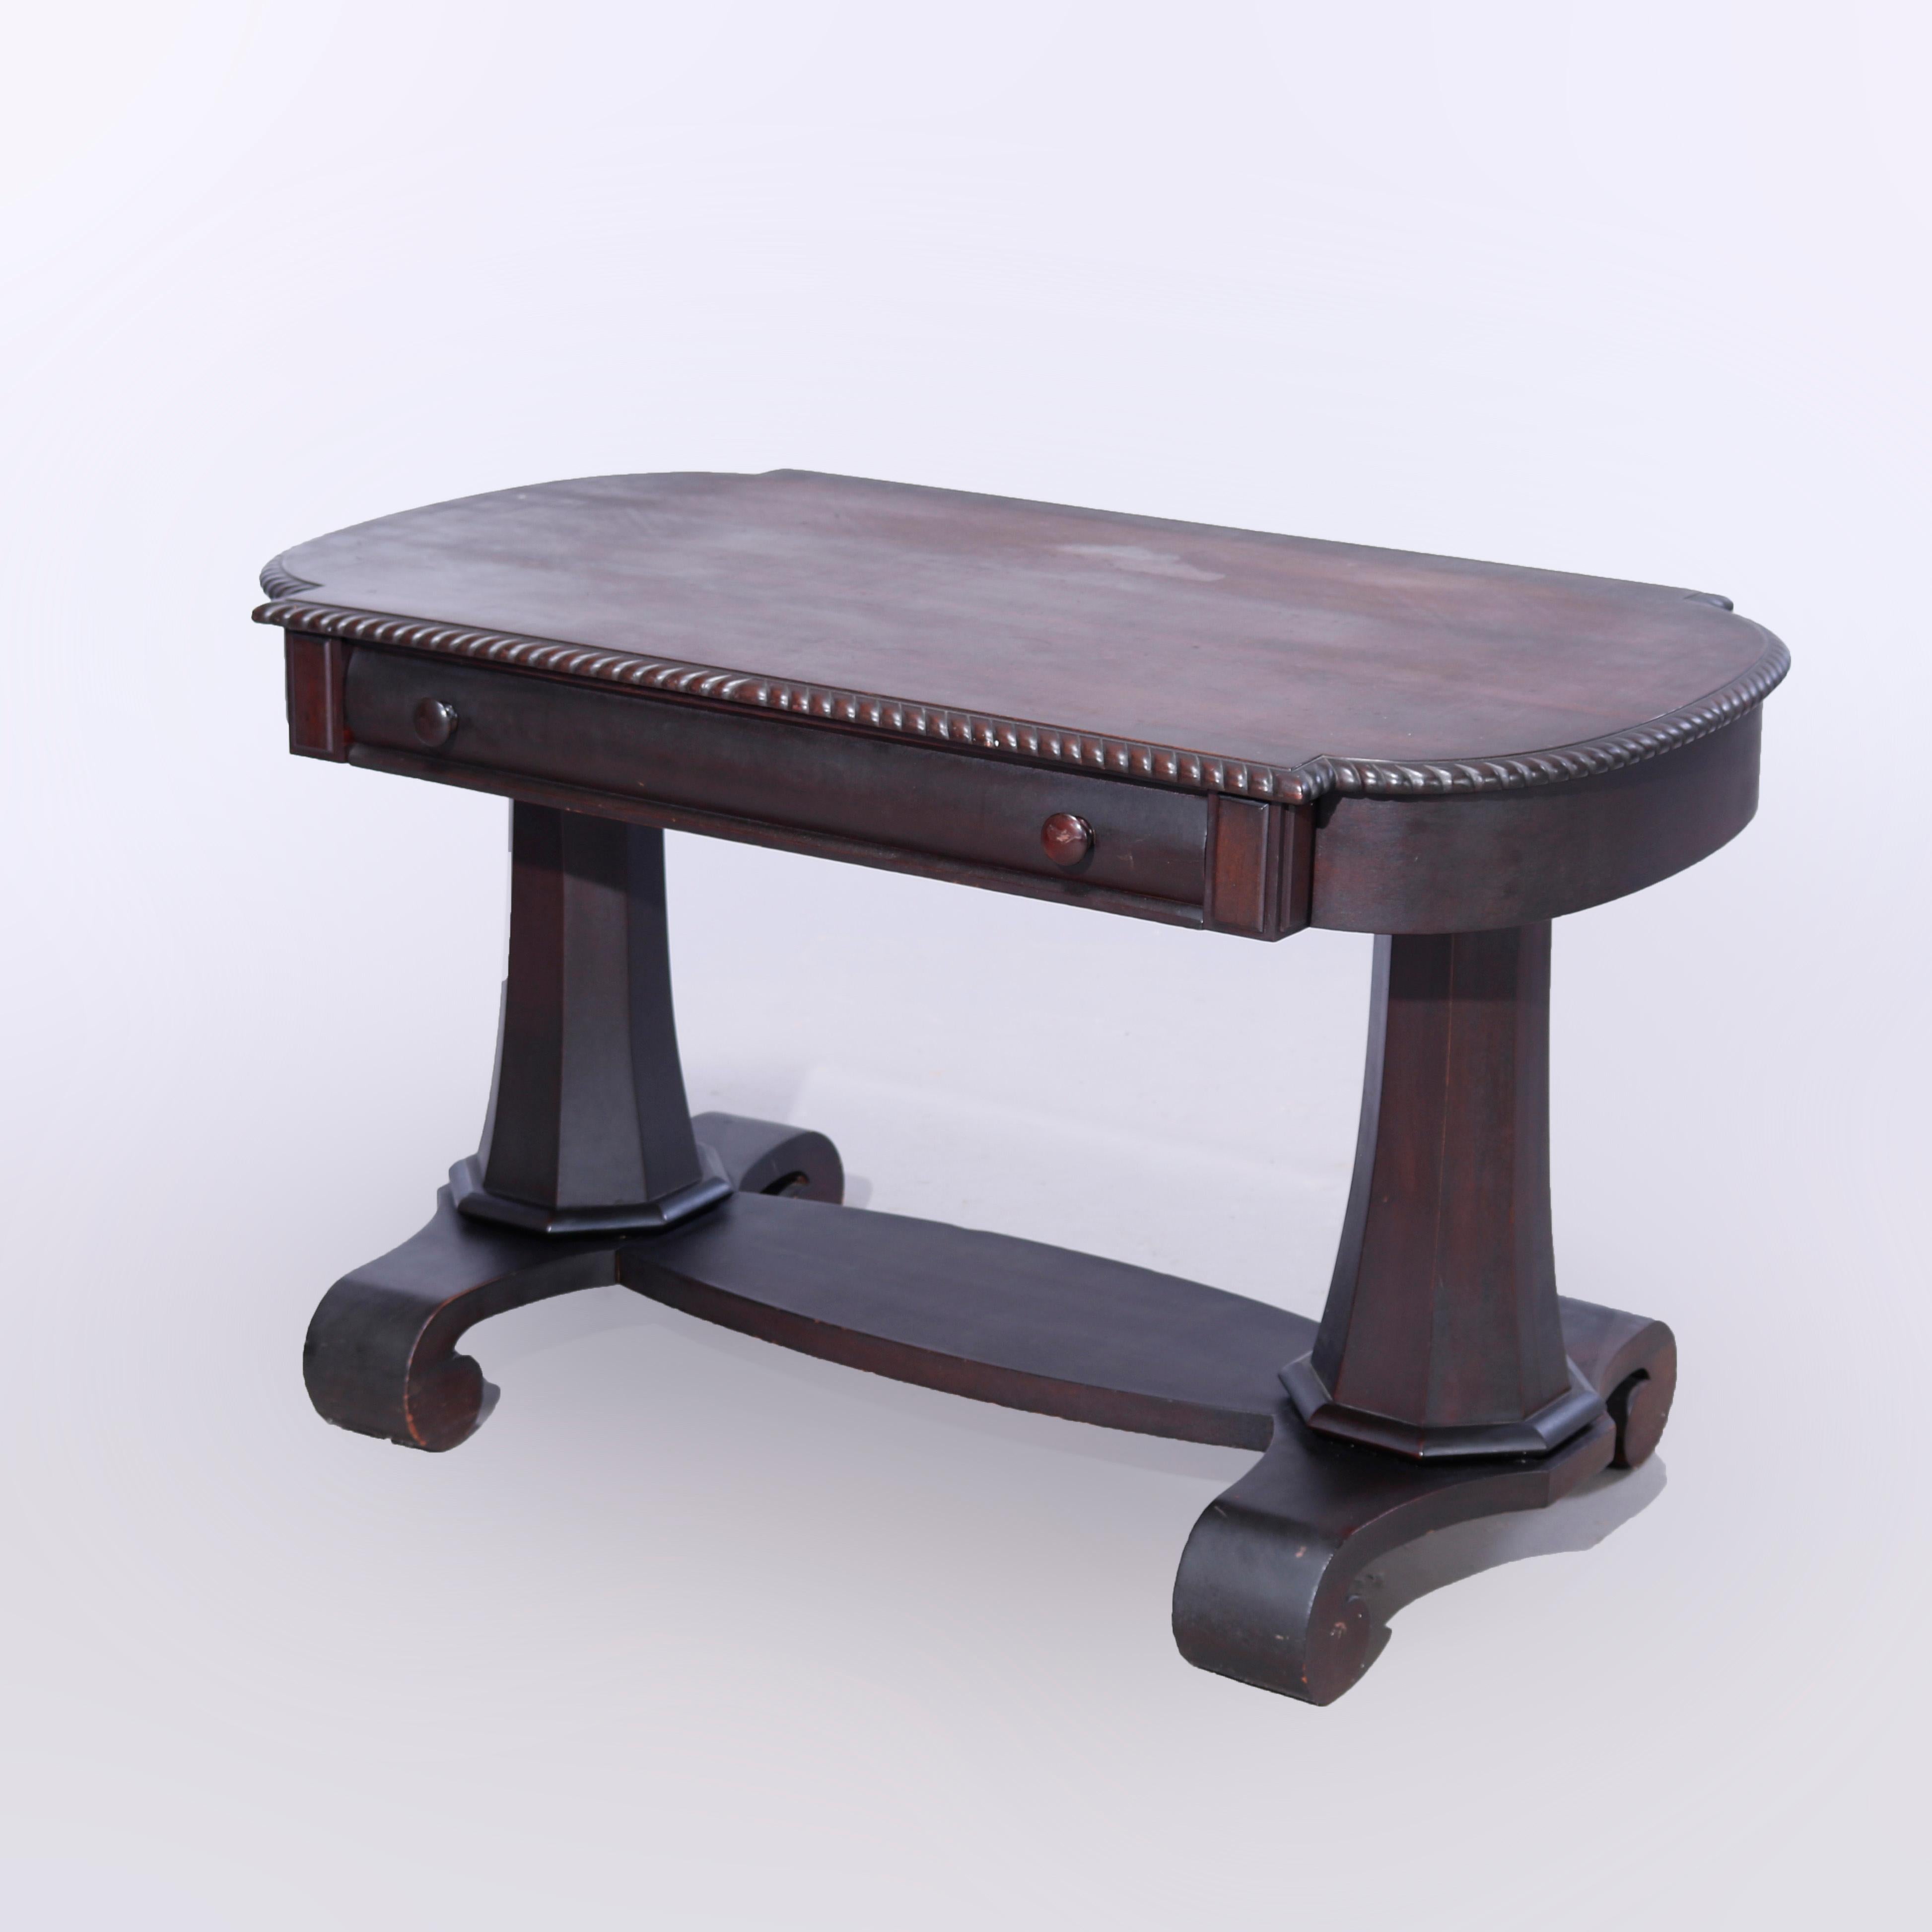 An antique Classical Greco library table offers mahogany construction in shaped oval form with top having gadroon bordering over single drawer, raised on double faceted and flared pedestals with base having scroll form feet, c1920

Measures - 28.5''